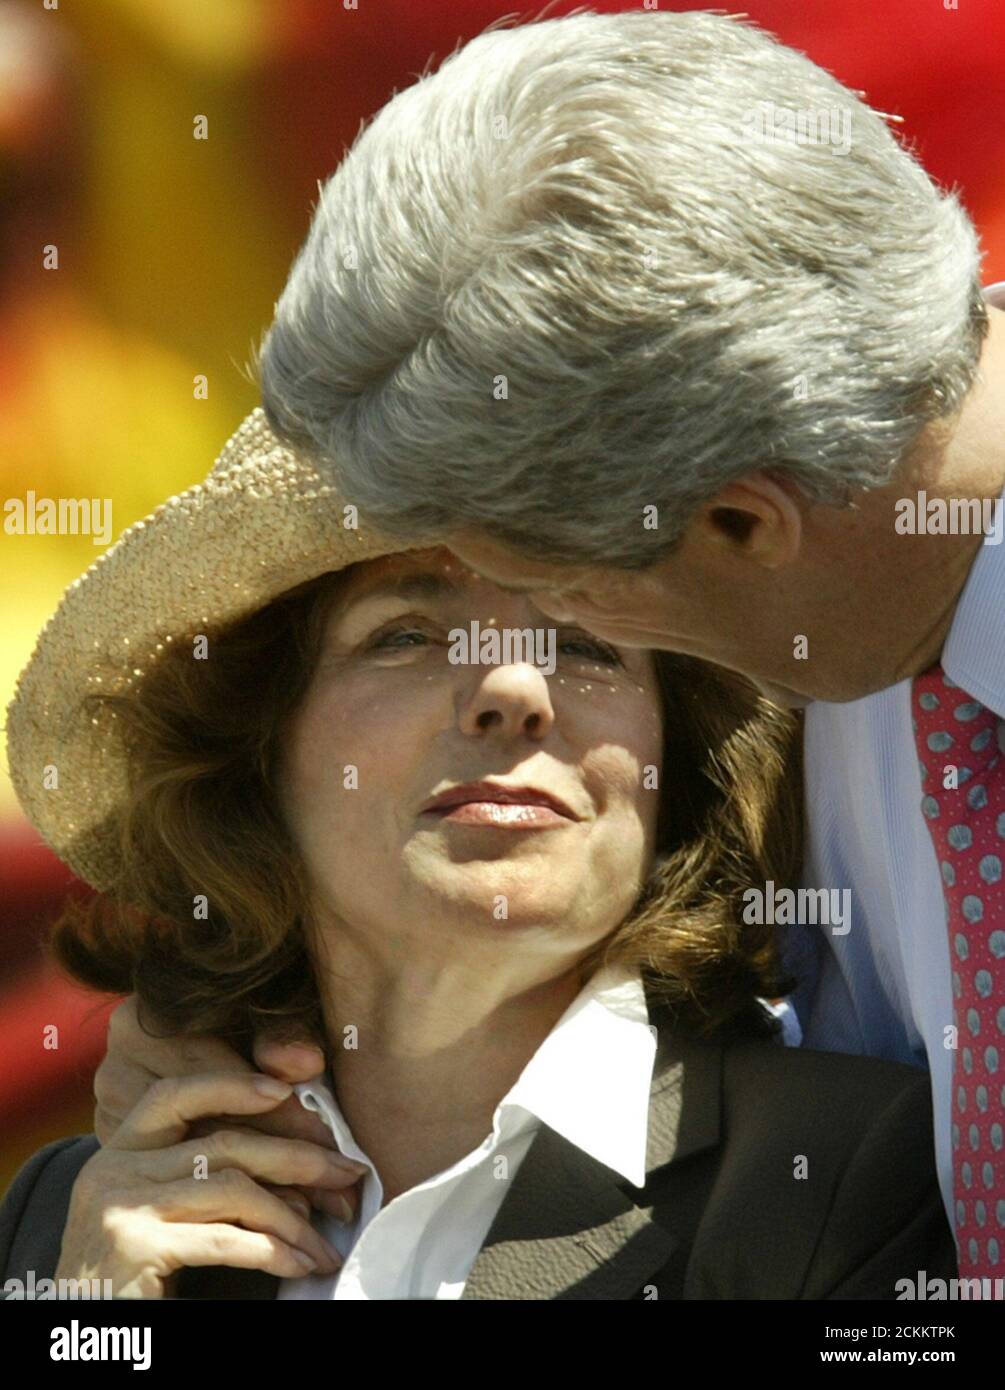 U.S. Democratic Presidential candidate John Kerry (R) hugs his wife Teresa Heinz Kerry after making a speech at Woodrow Wilson High School in Los Angeles, May 5, 2004. Kerry, the presumptive Democratic presidential nominee, has vowed to take a tougher line than U.S. President George W. Bush against foreign exchange manipulation. Last week, he pledged 'a no-nonsense effort to stop illegal currency manipulation that's going in countries like China and Japan.' REUTERS/Lucy Nicholson US ELECTION  LN/GN Stock Photo